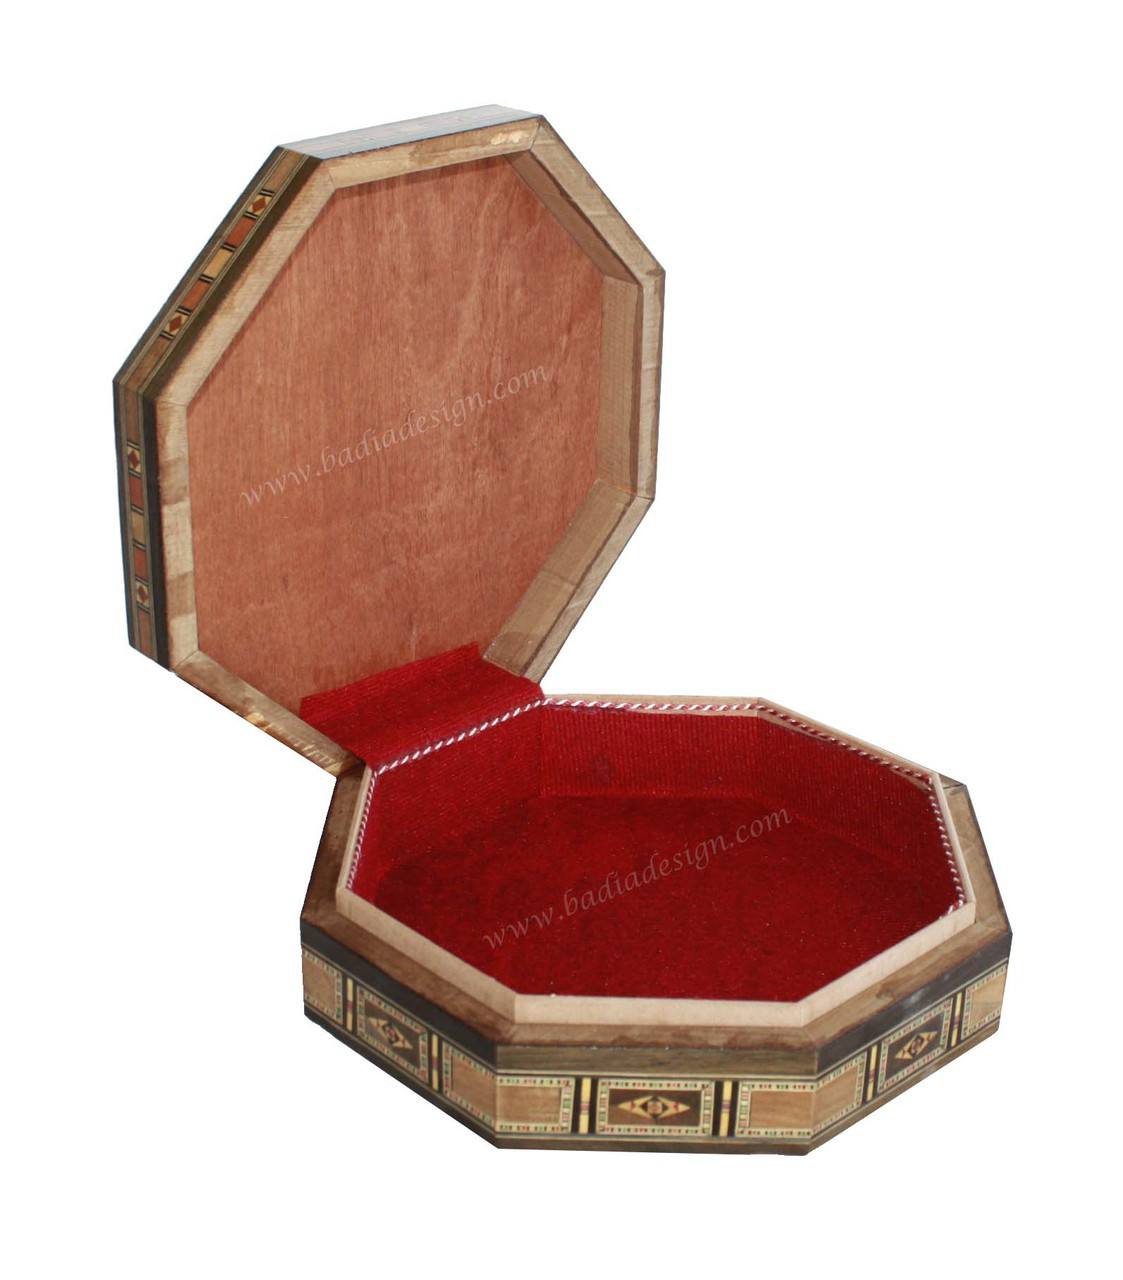  Natural Pure Soapstone Jewelry Box 5x5 inch 1 Pcs Heavy  Undercut Jali Work Carving Designer Jewelry Octagonal Shape Luxury And  Classic Home Decorative For Wedding, Birthday Gifting Purpose Showpiece :  Clothing